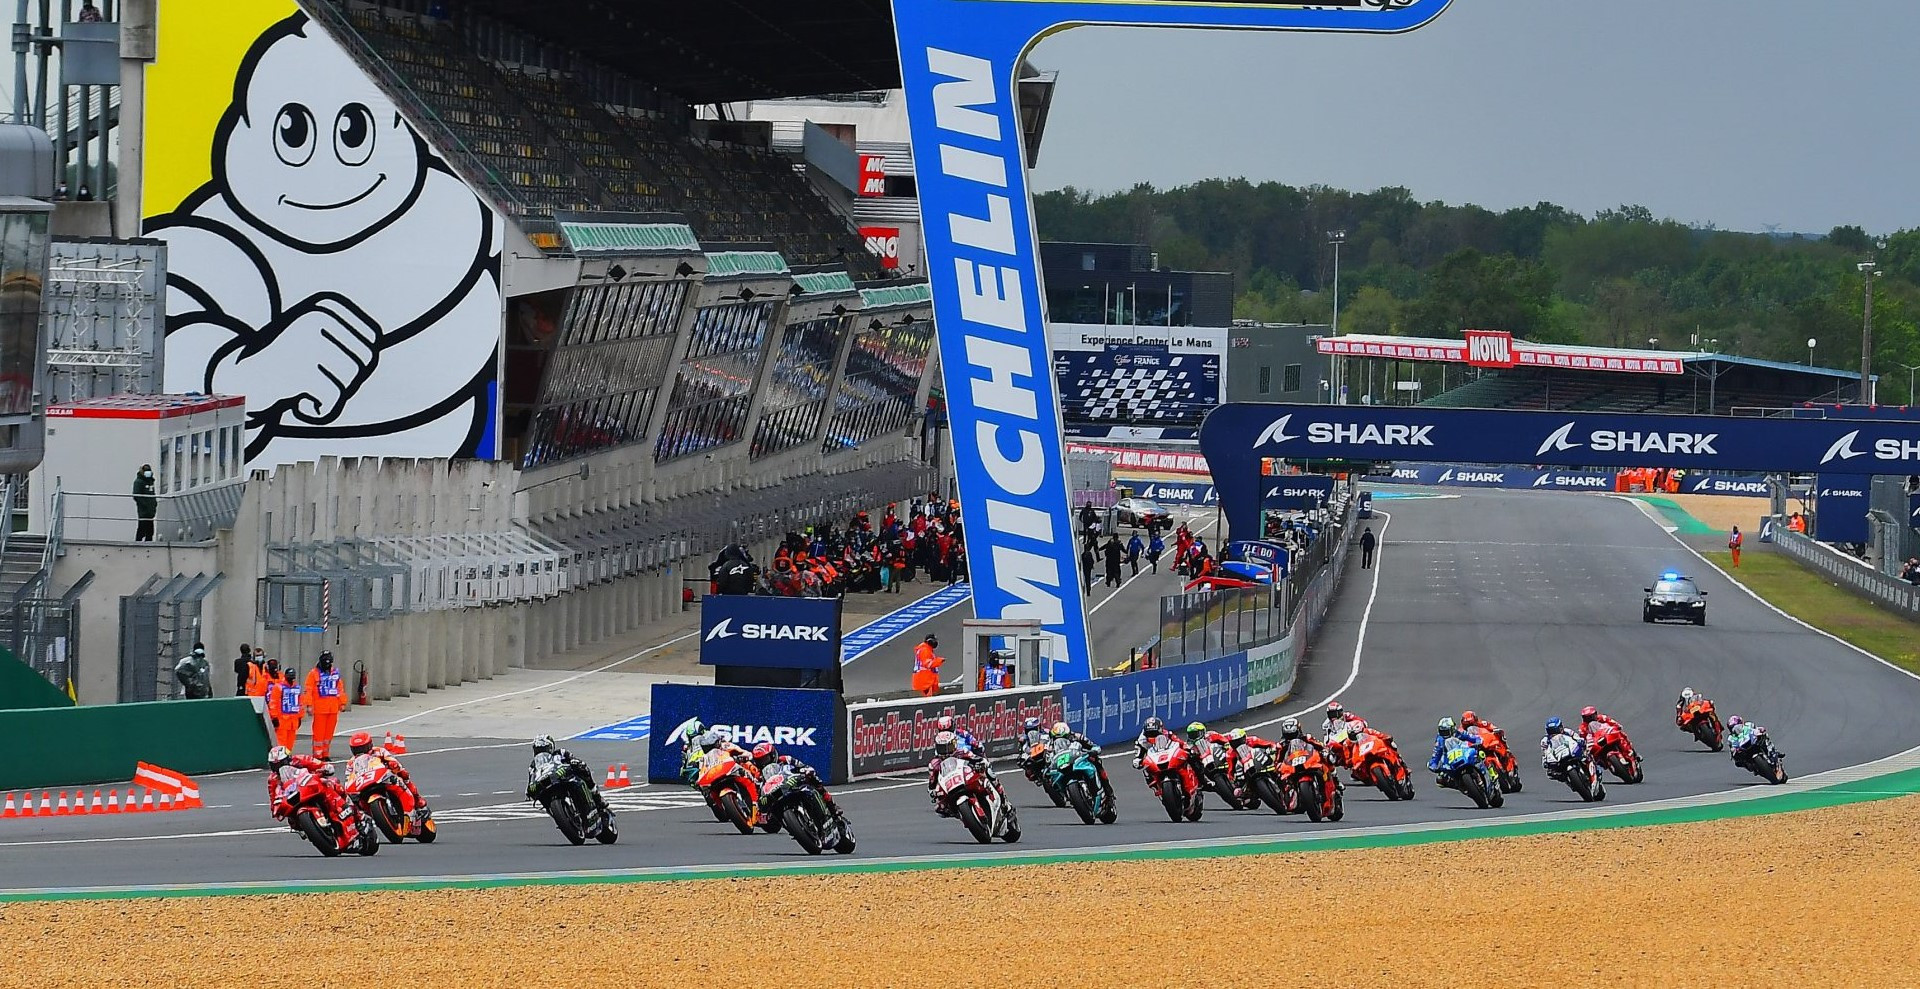 The start of the MotoGP race at Le Mans in 2021. Photo courtesy Michelin.